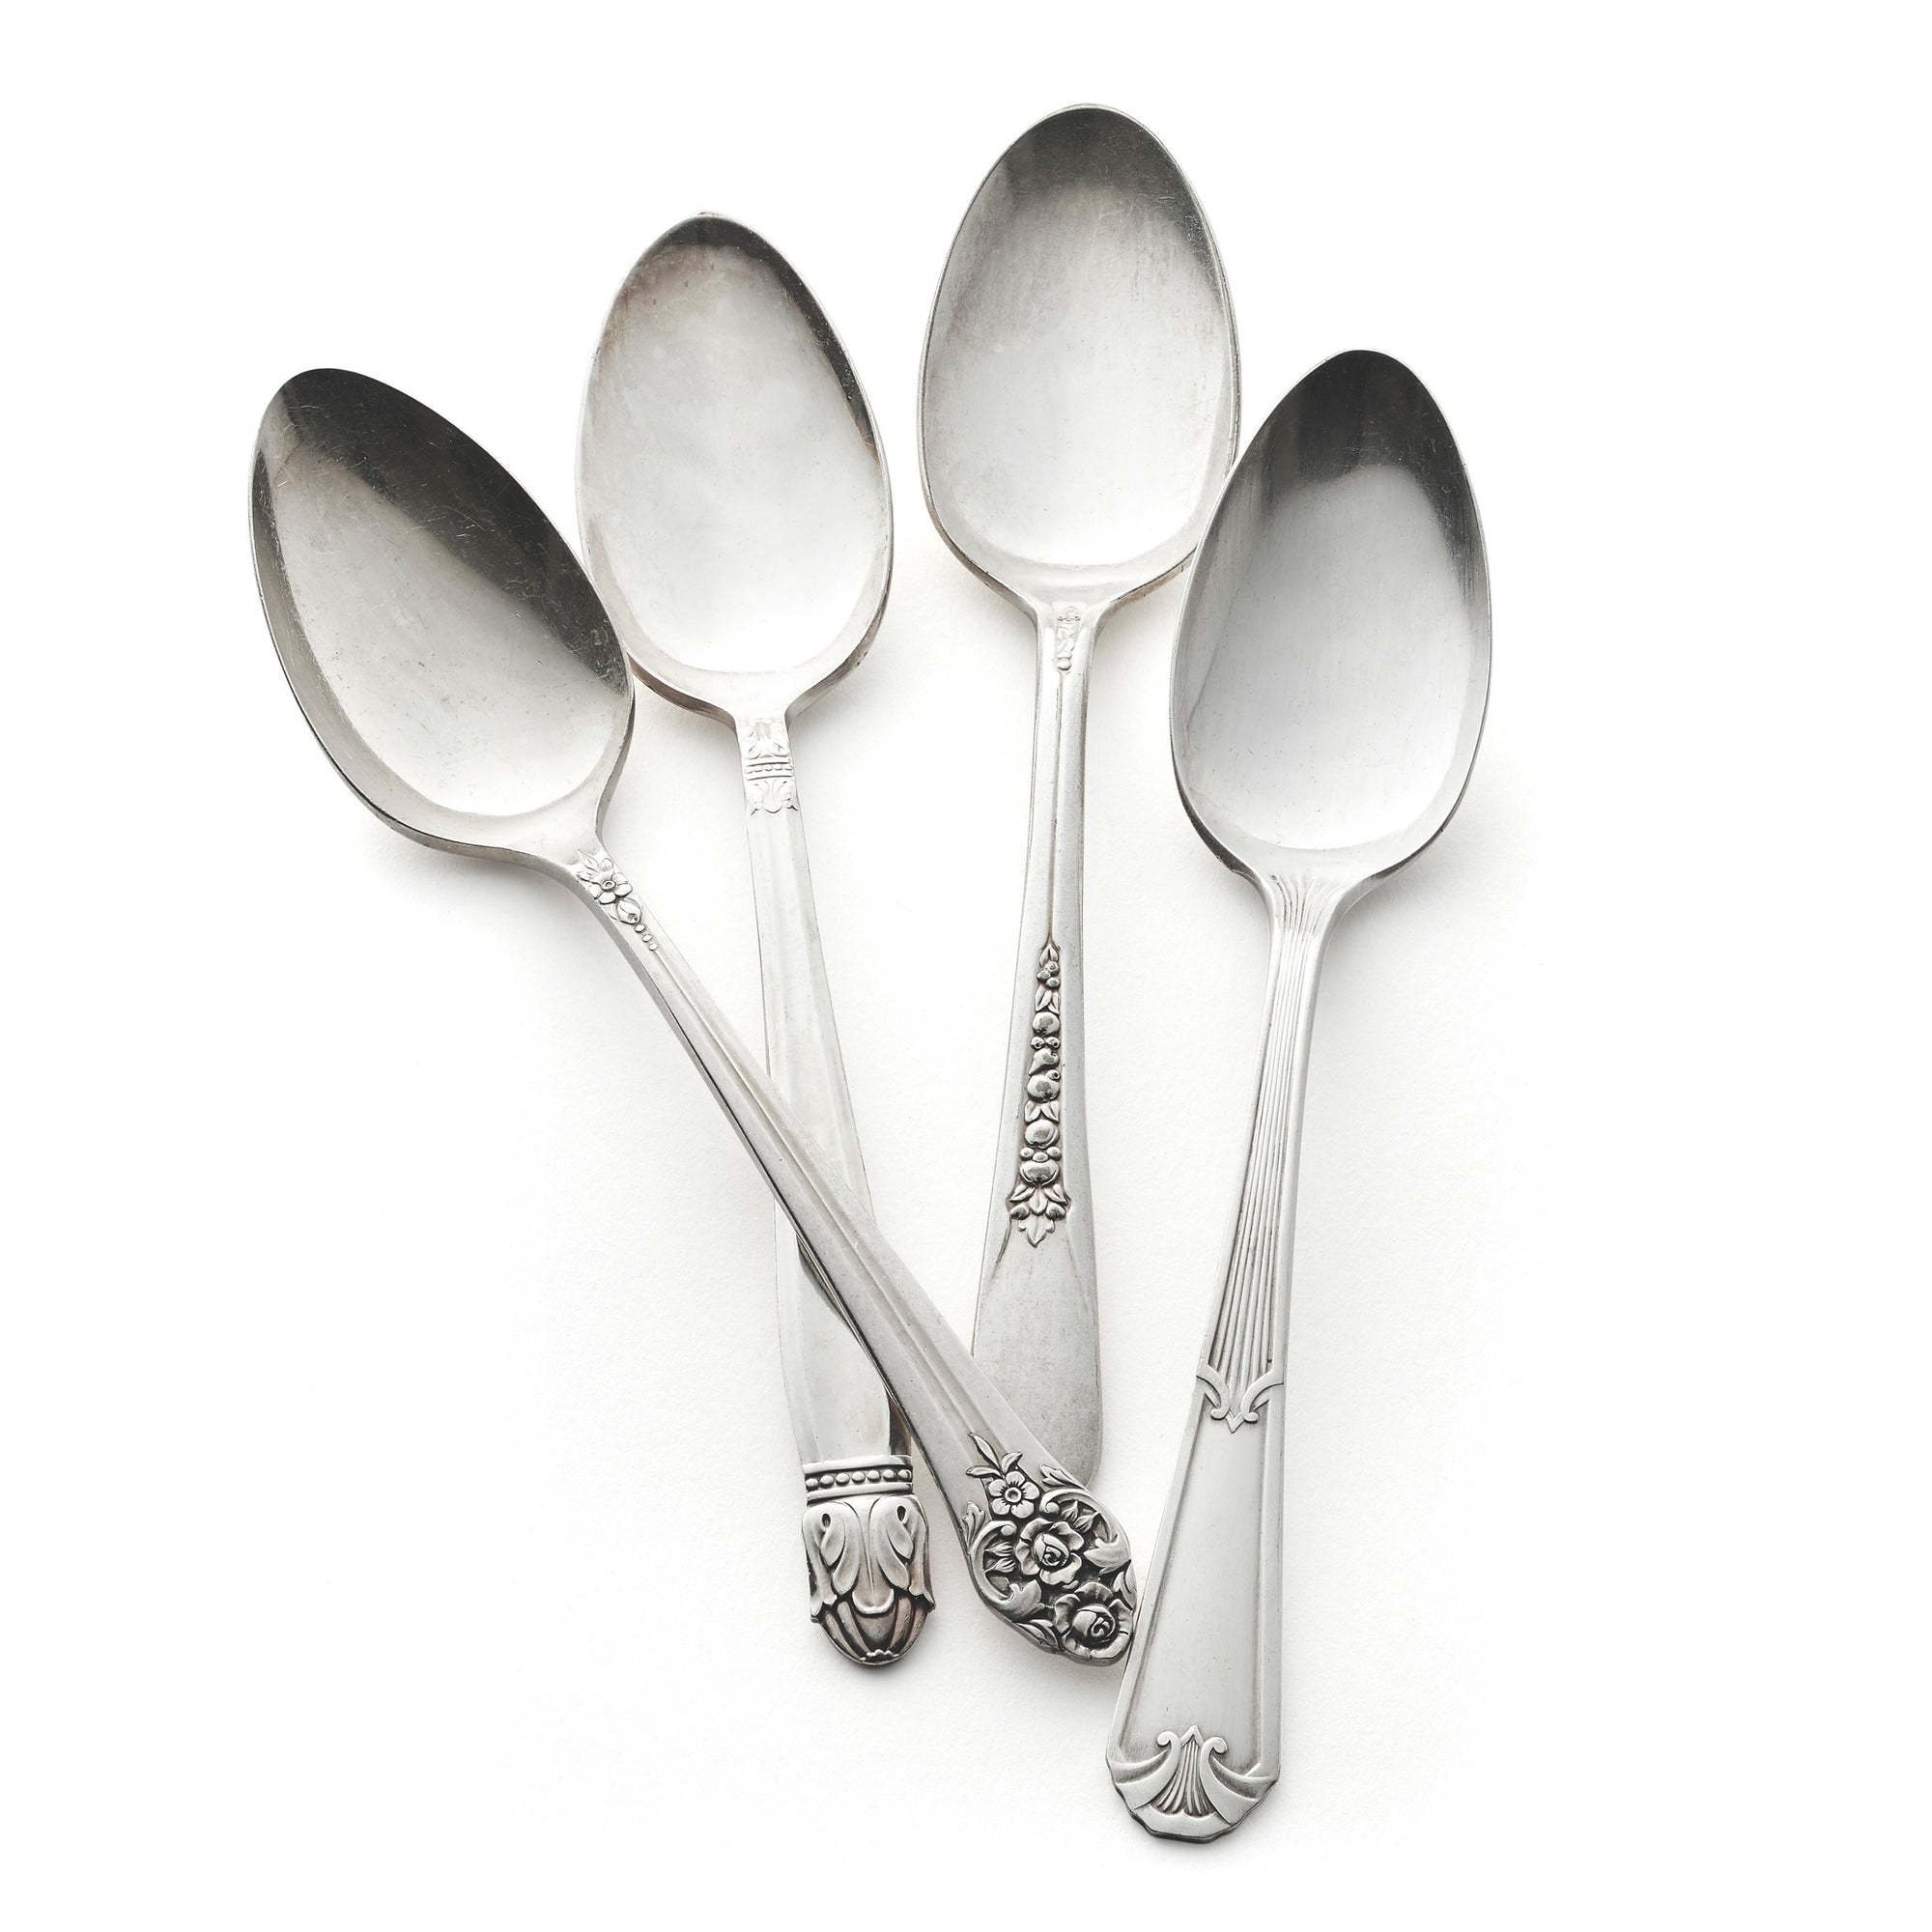 Vintage, silver-plated teaspoons collected by Caskata.